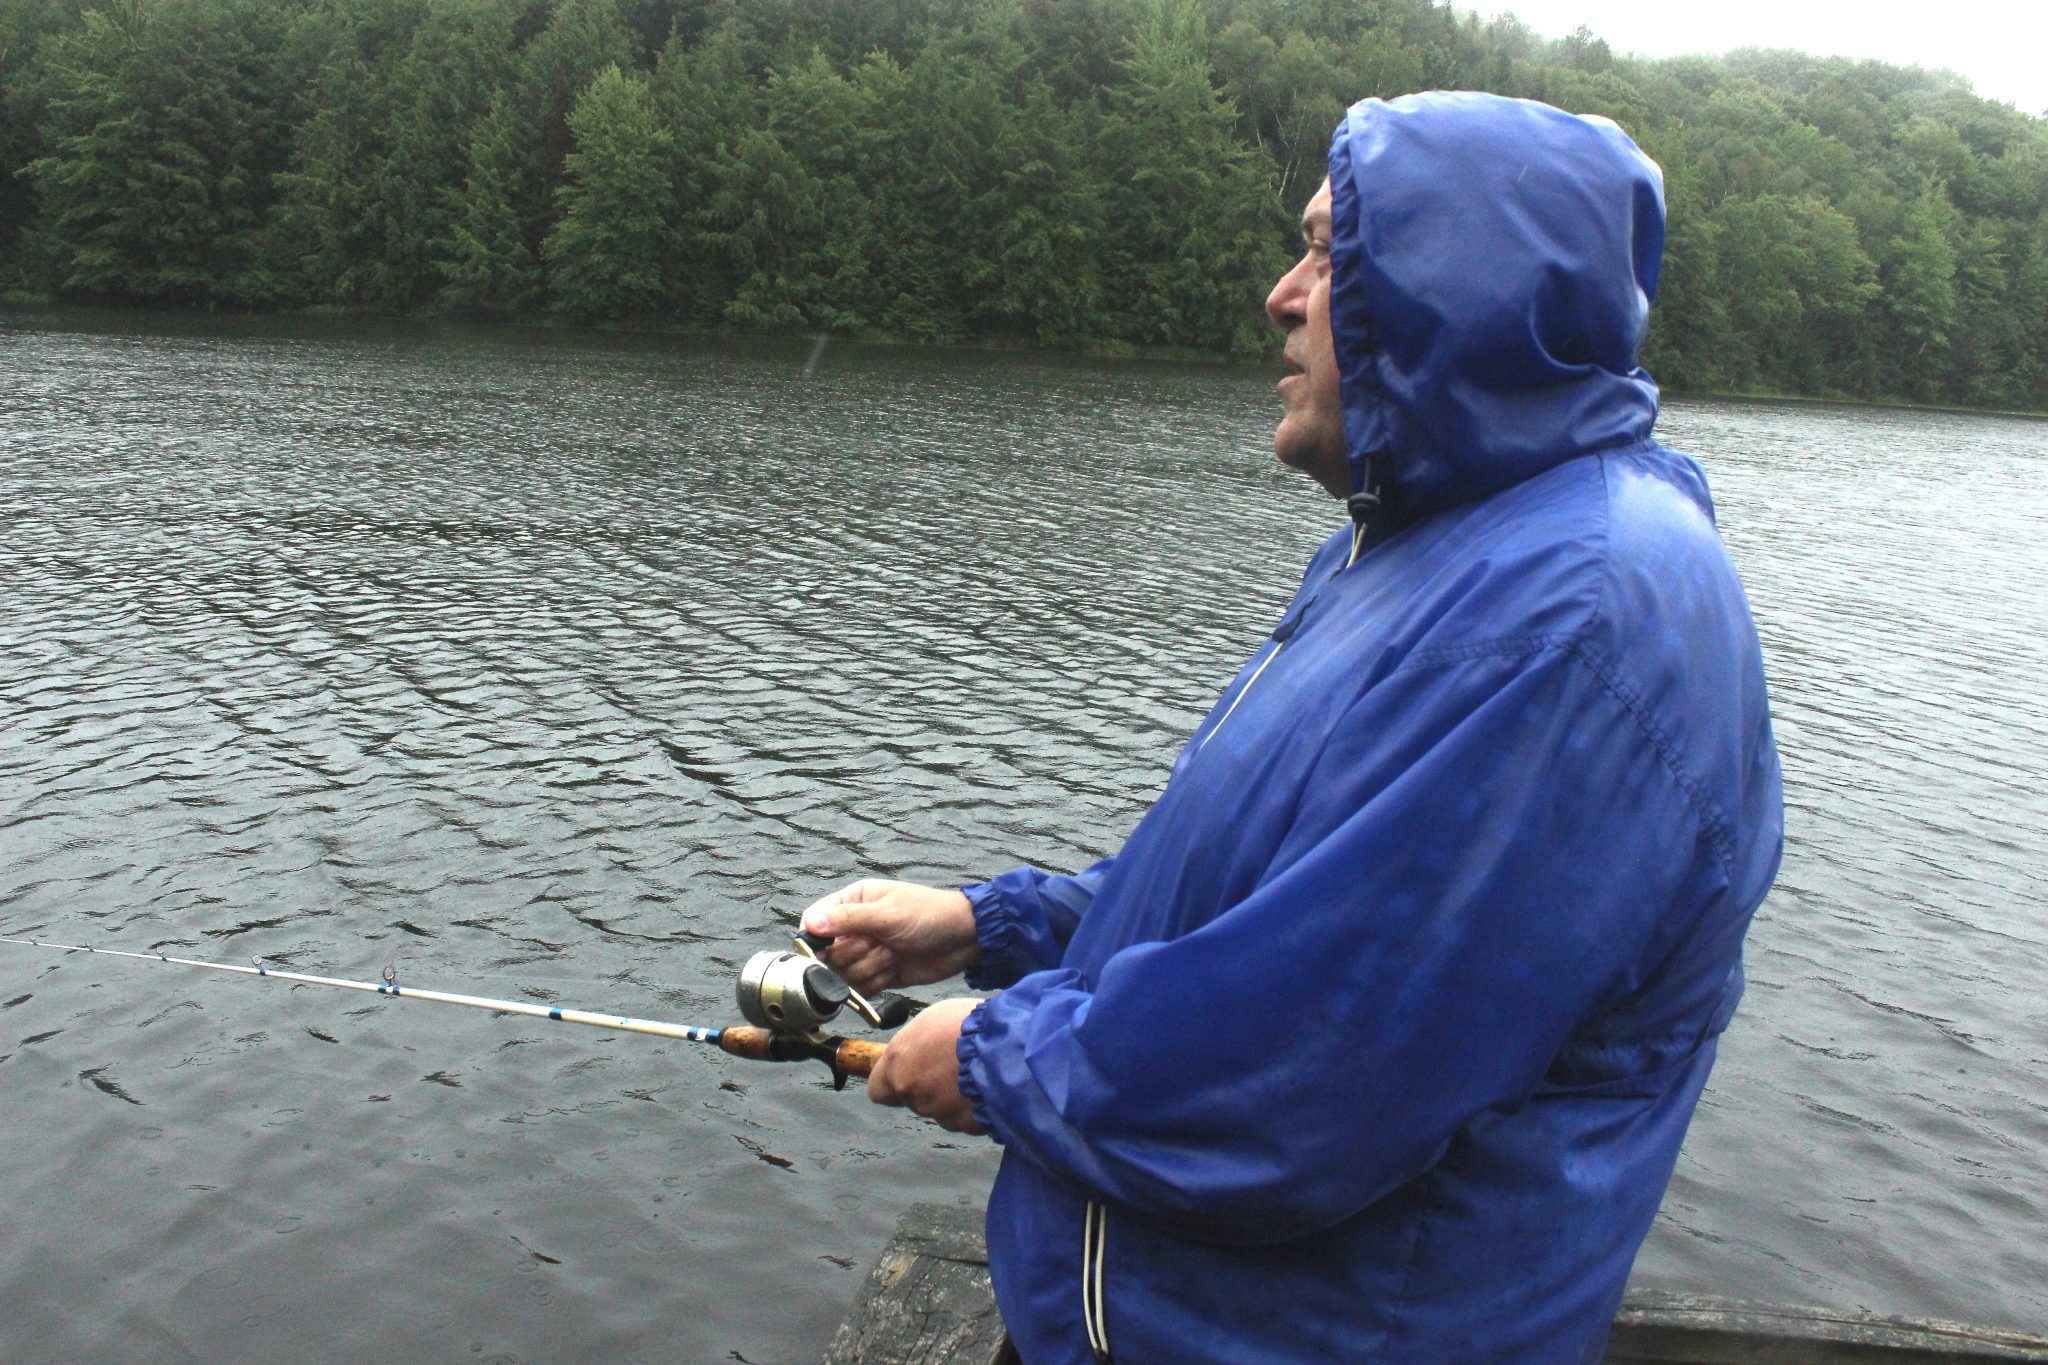 Trek to Timm’s Hill: Fish cooperate, but rain doesn’t